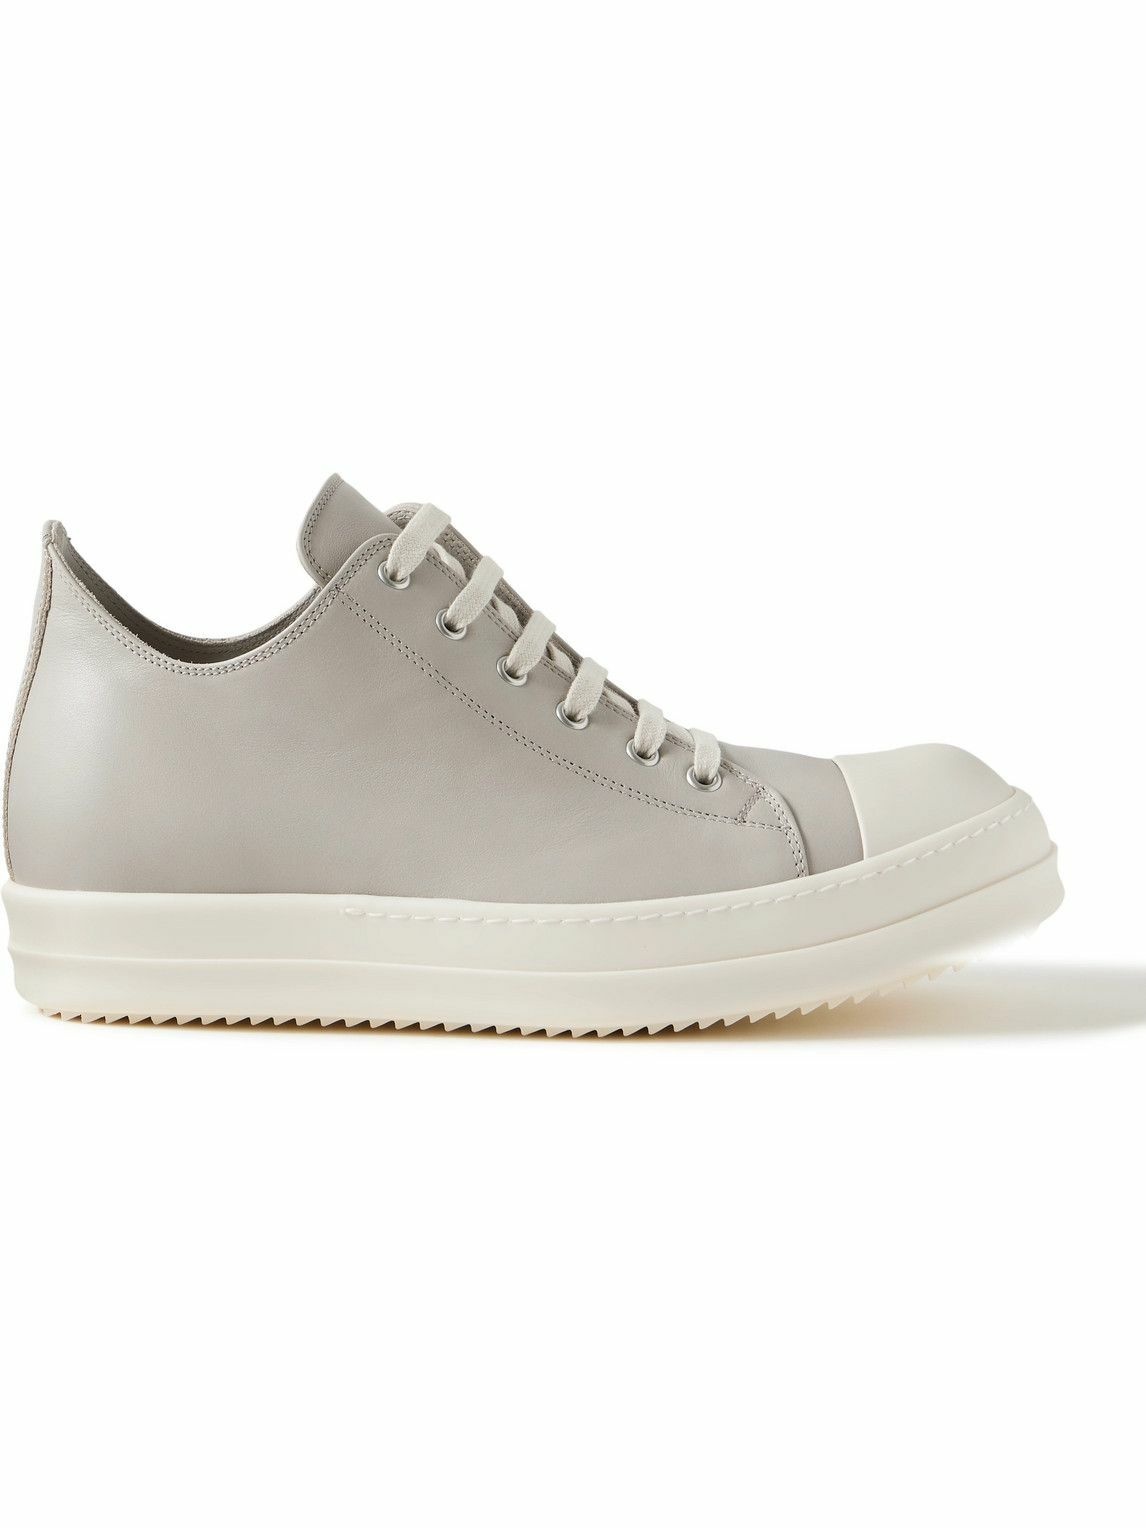 Rick Owens - Leather Sneakers - Gray Rick Owens